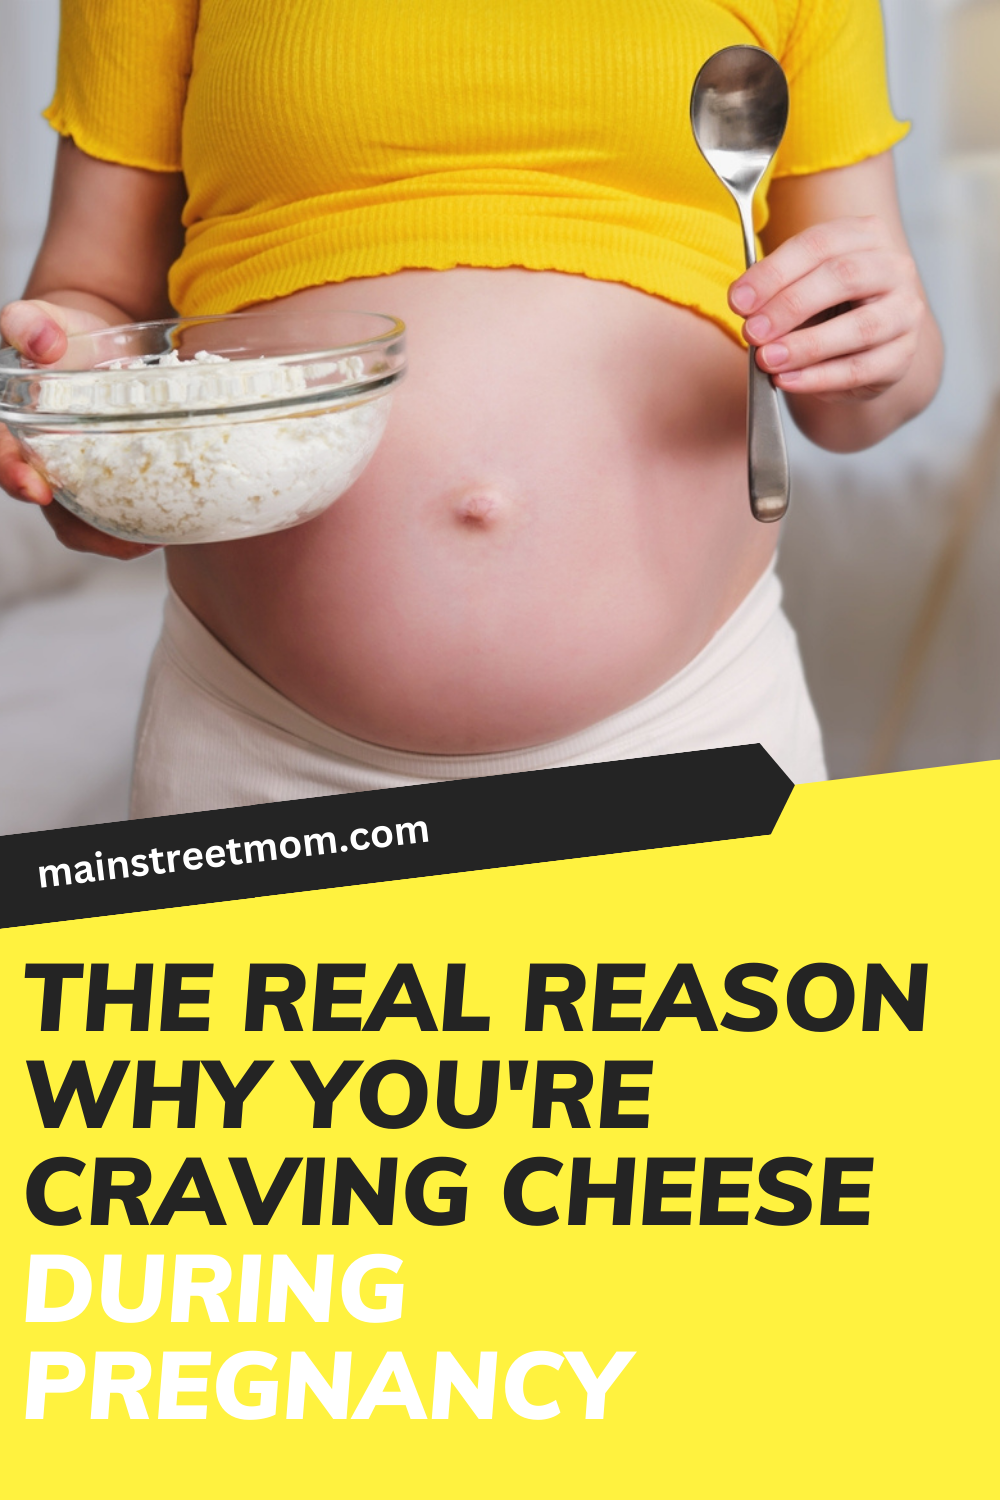 The Real Reason Why You're Craving Cheese During Pregnancy